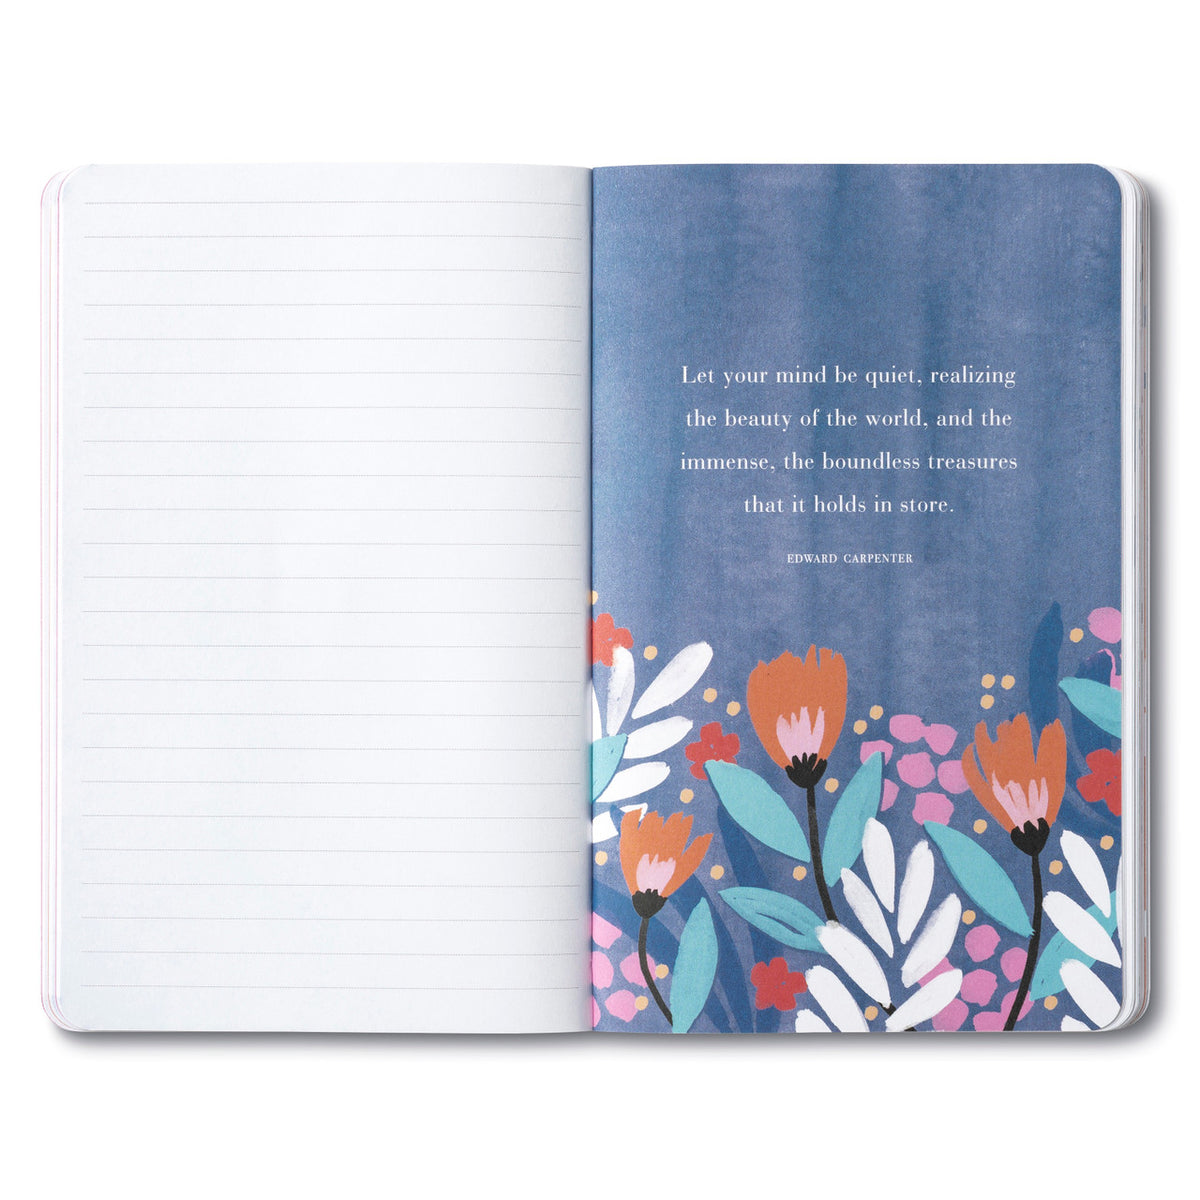 &quot;Dwell On The Beauty Of Life&quot; — Marcus Aurelius Write Now Softcover Journal